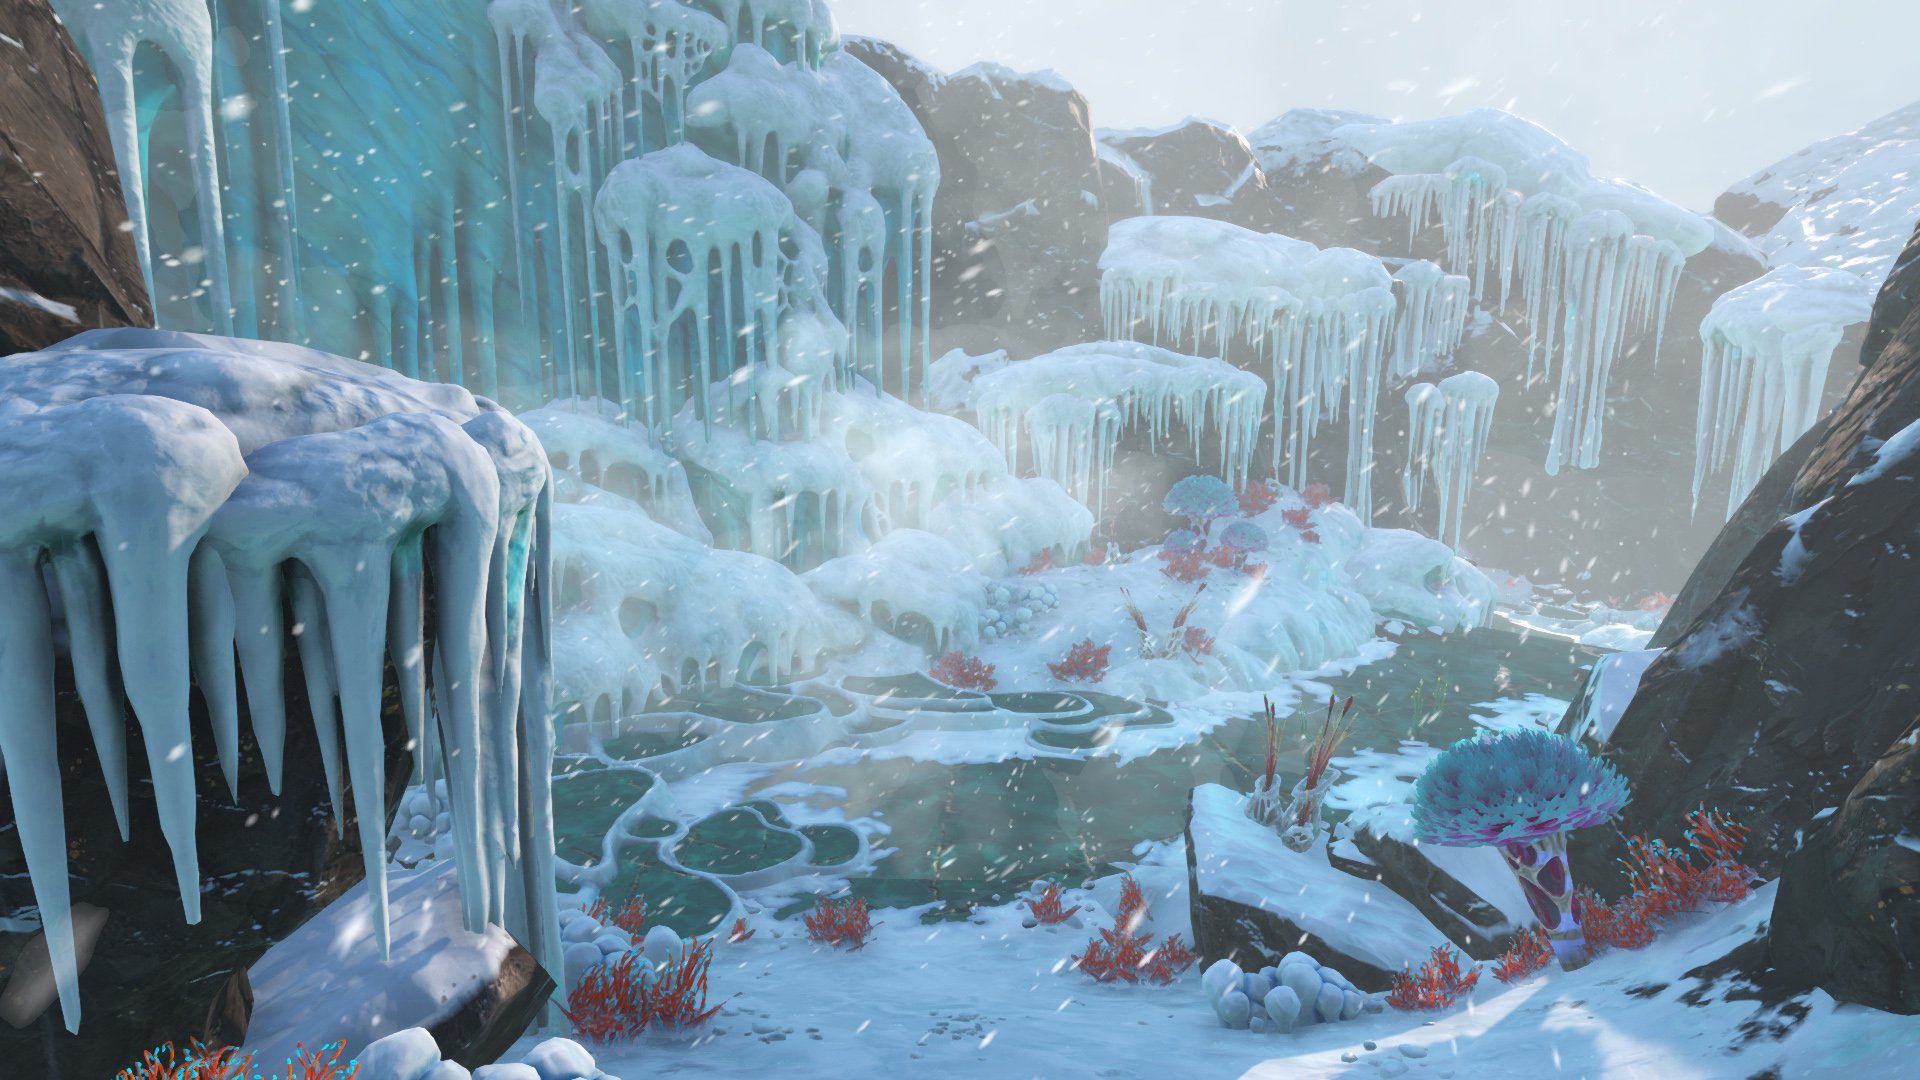 Subnautica Below Zero early access release date revealed - picture #2